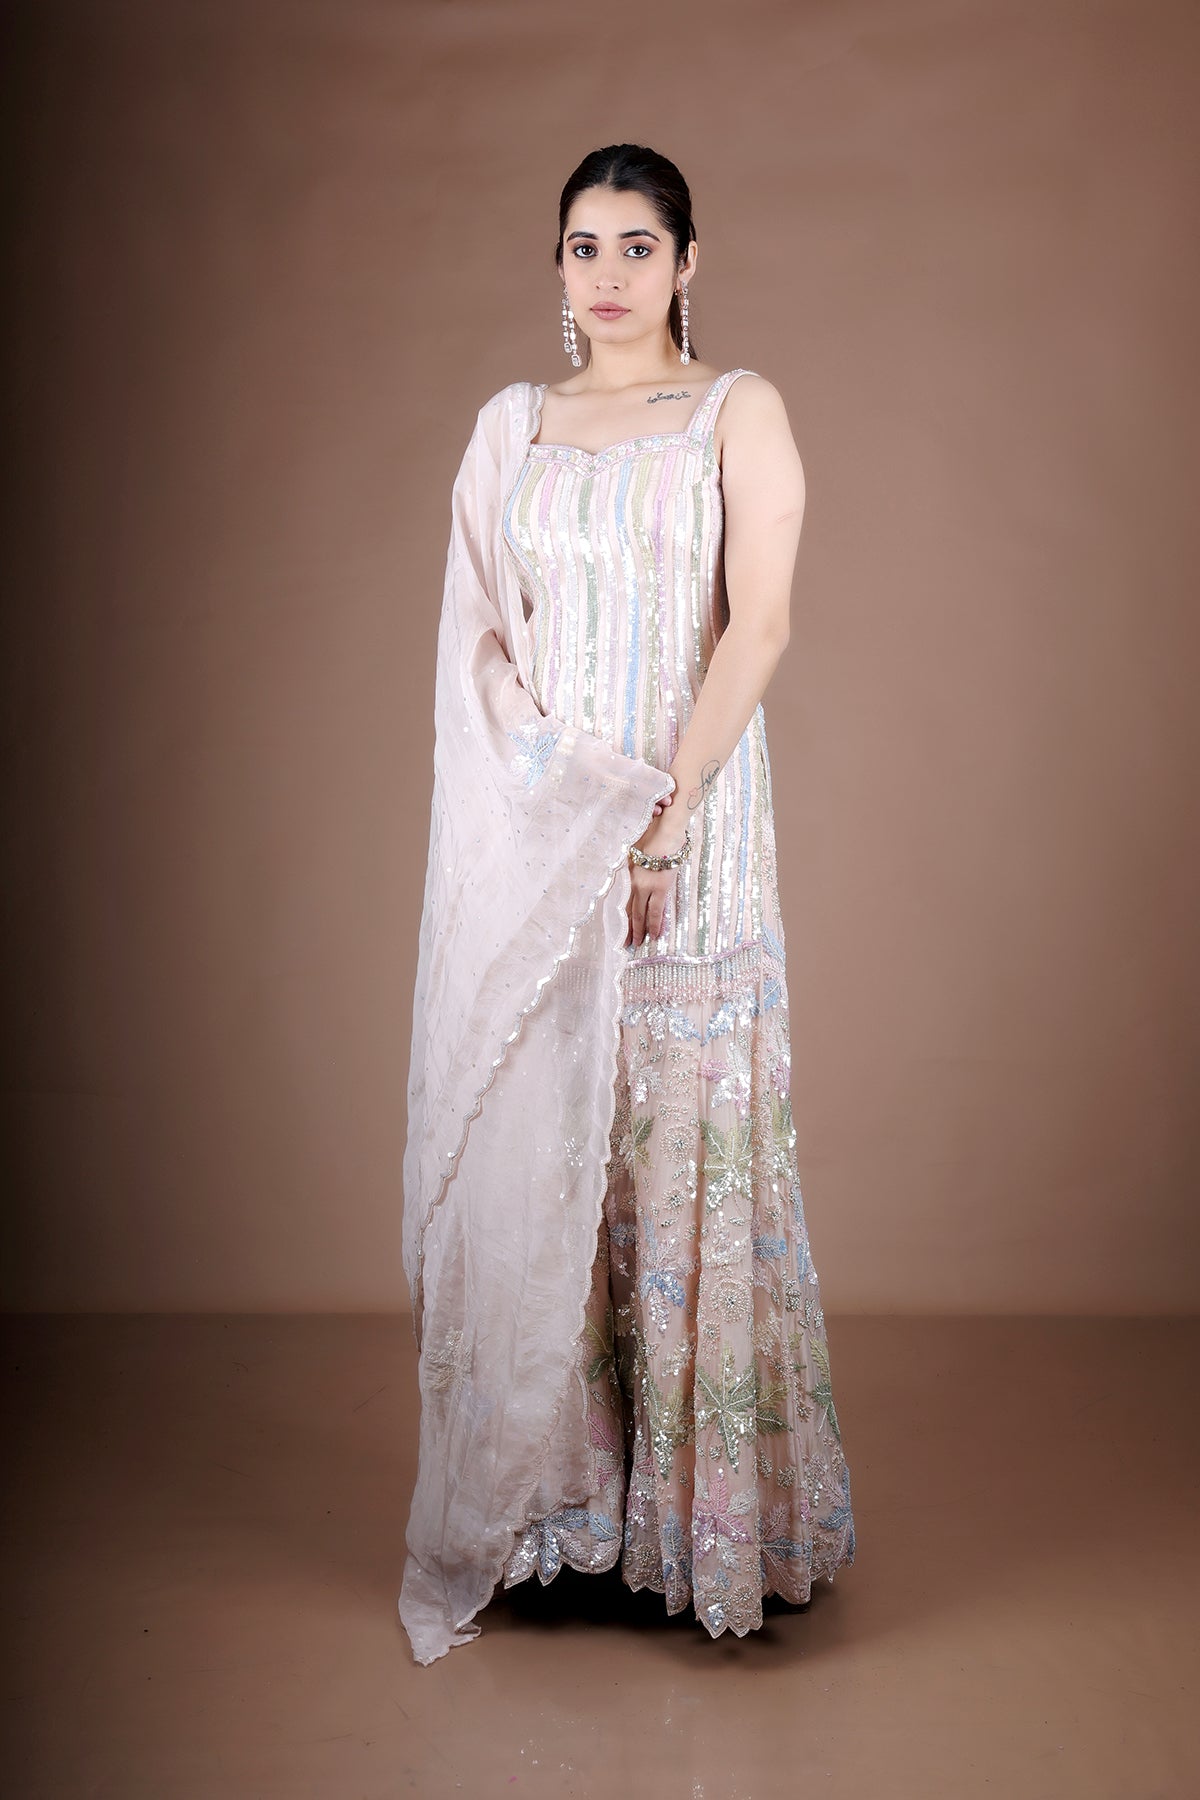 Pink Sharara suit adorned with hand embroidery